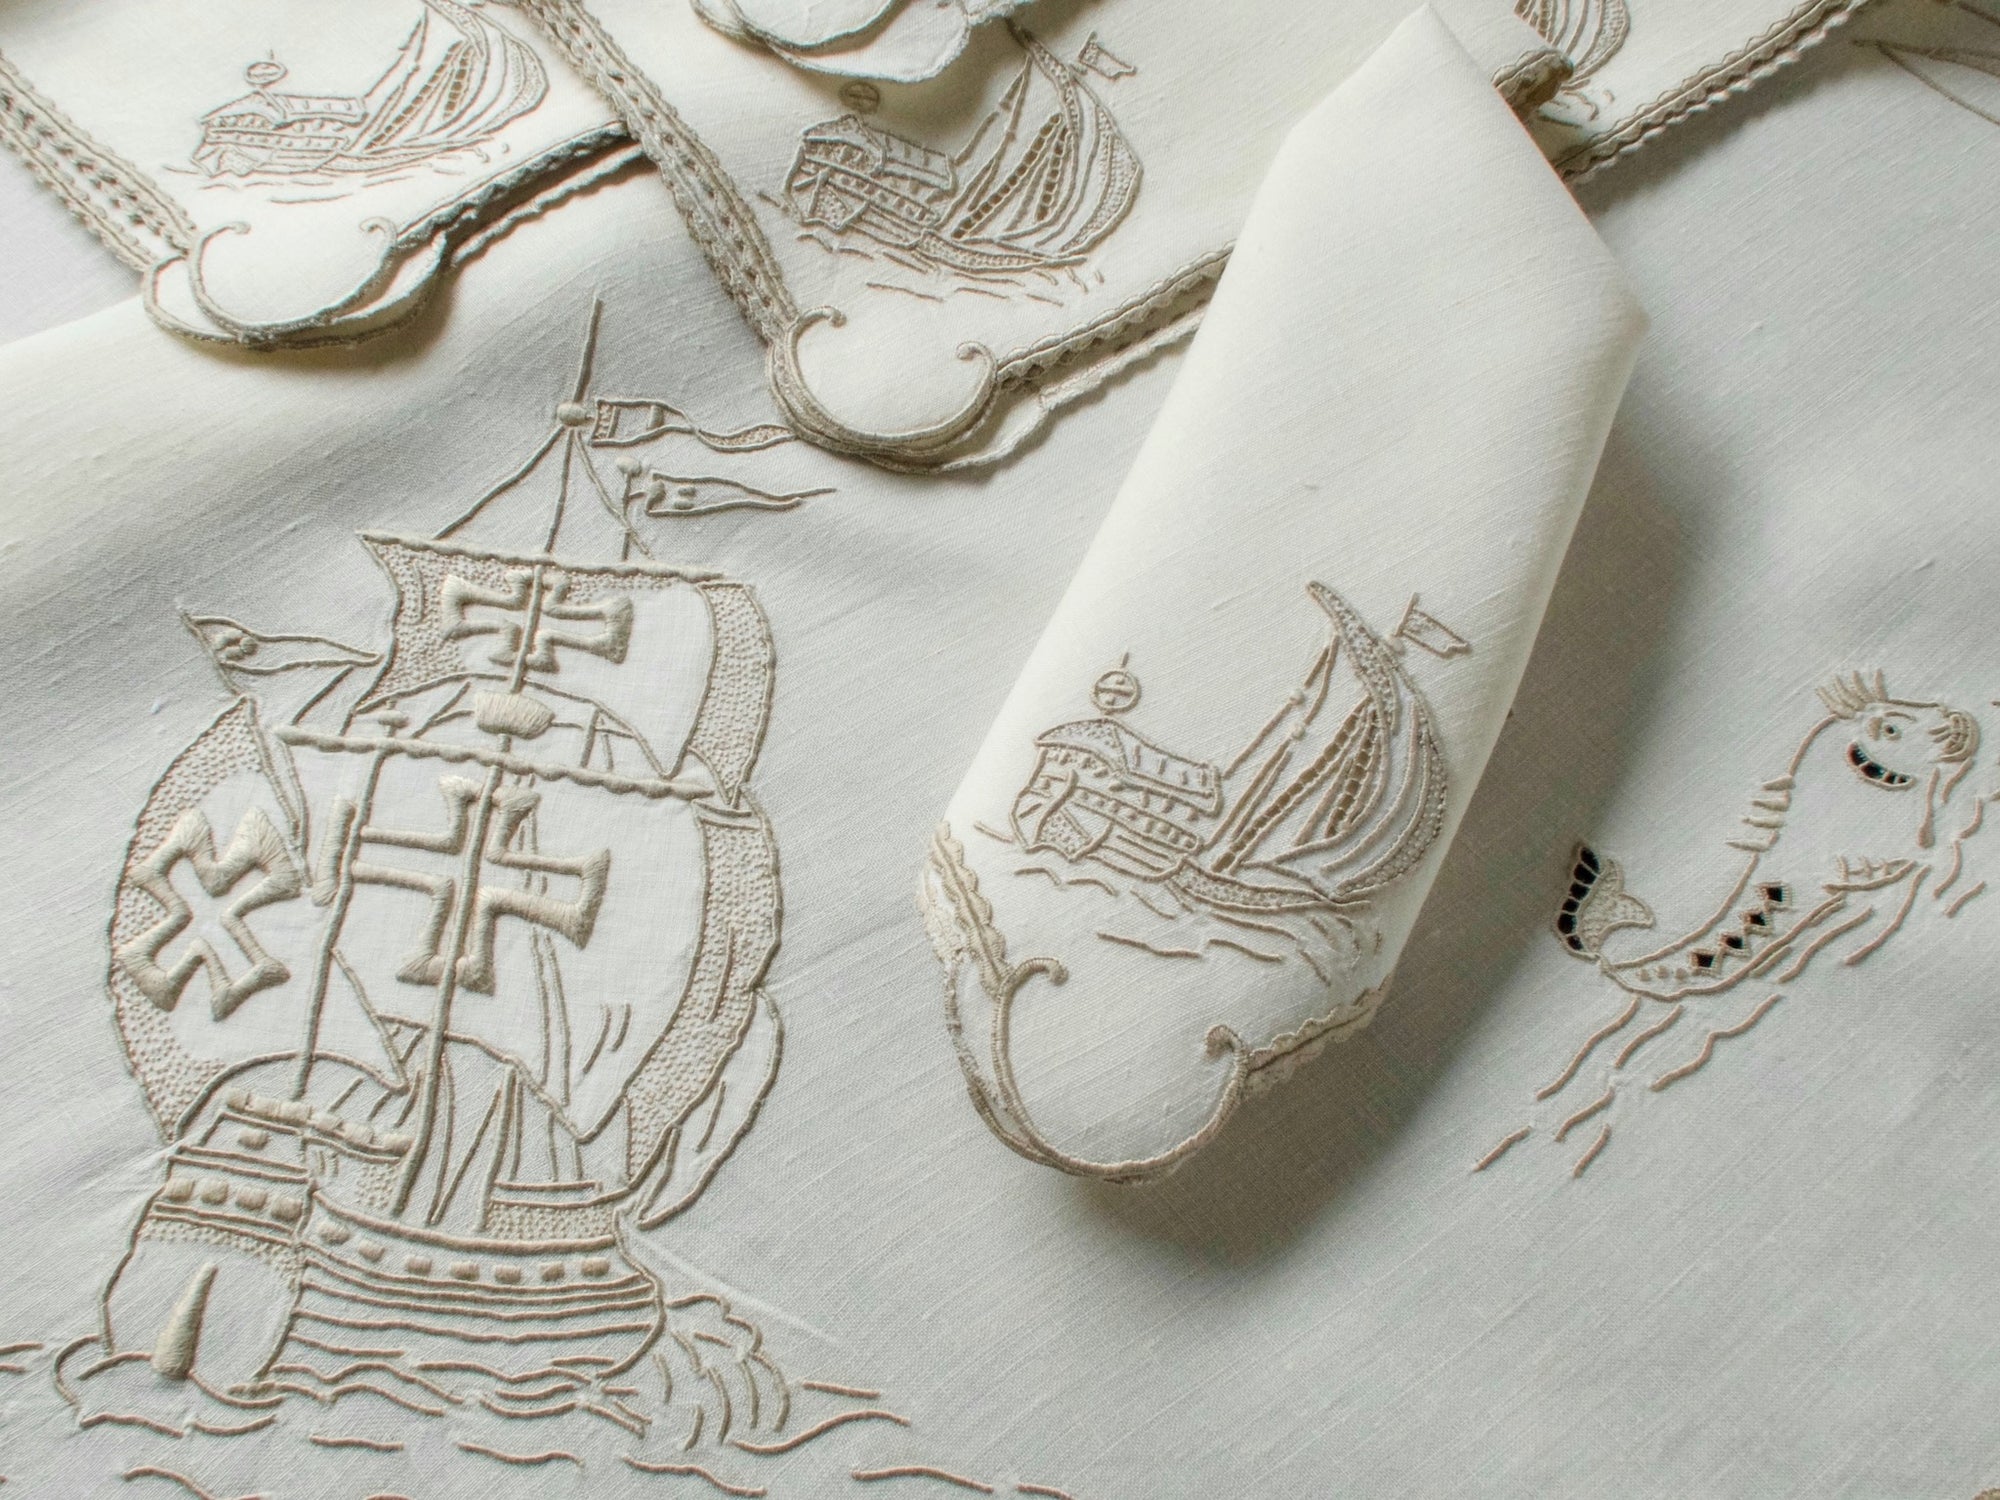 old ship embroidered on linen